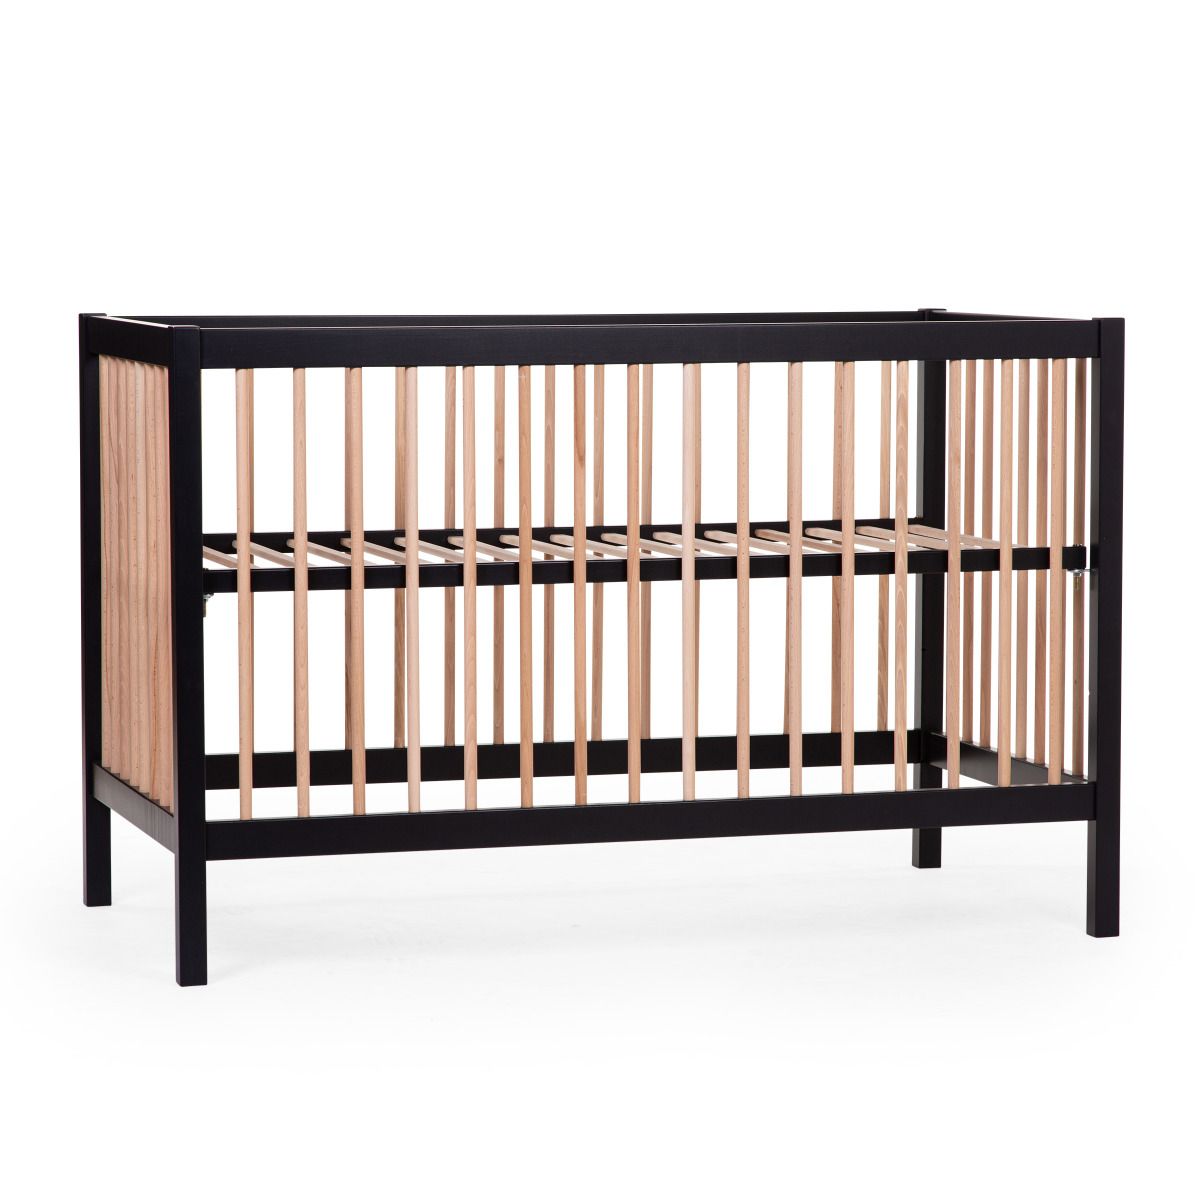 Persoon belast met sportgame precedent Nacht Order the ChildHome Cot 97 Baby Bed - 60x120 cm. online - Baby Plus